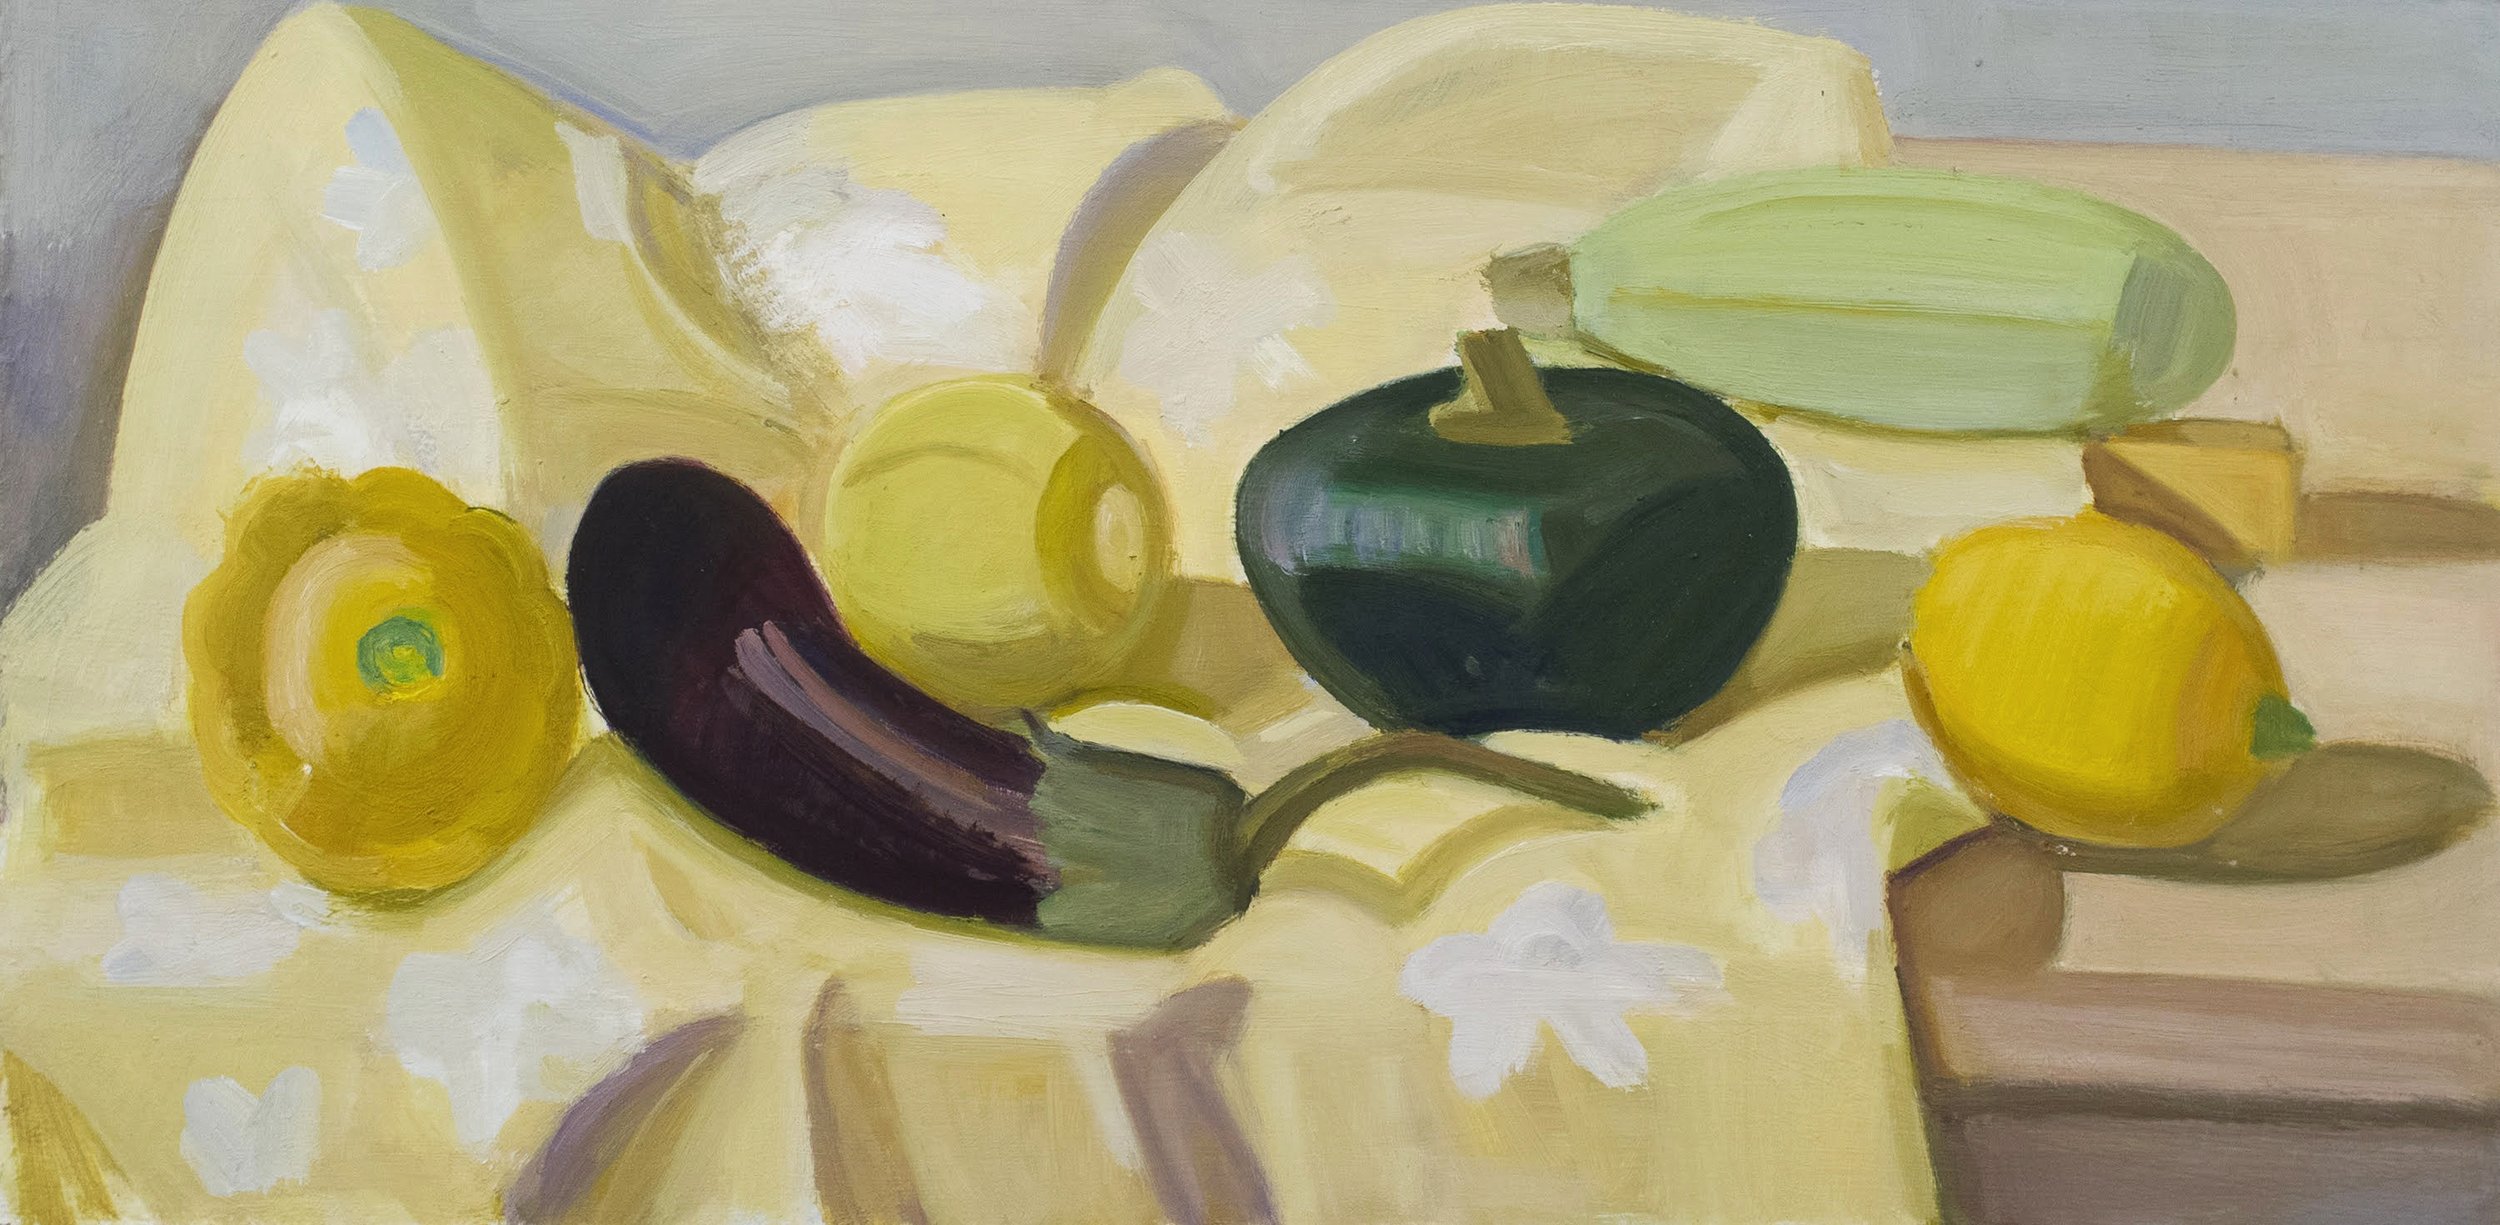   Yellow Squash, Lemon, Eggplant on Yellow Cloth , c. 2012, oil/panel, 10 x 20 in. (Private collection) 